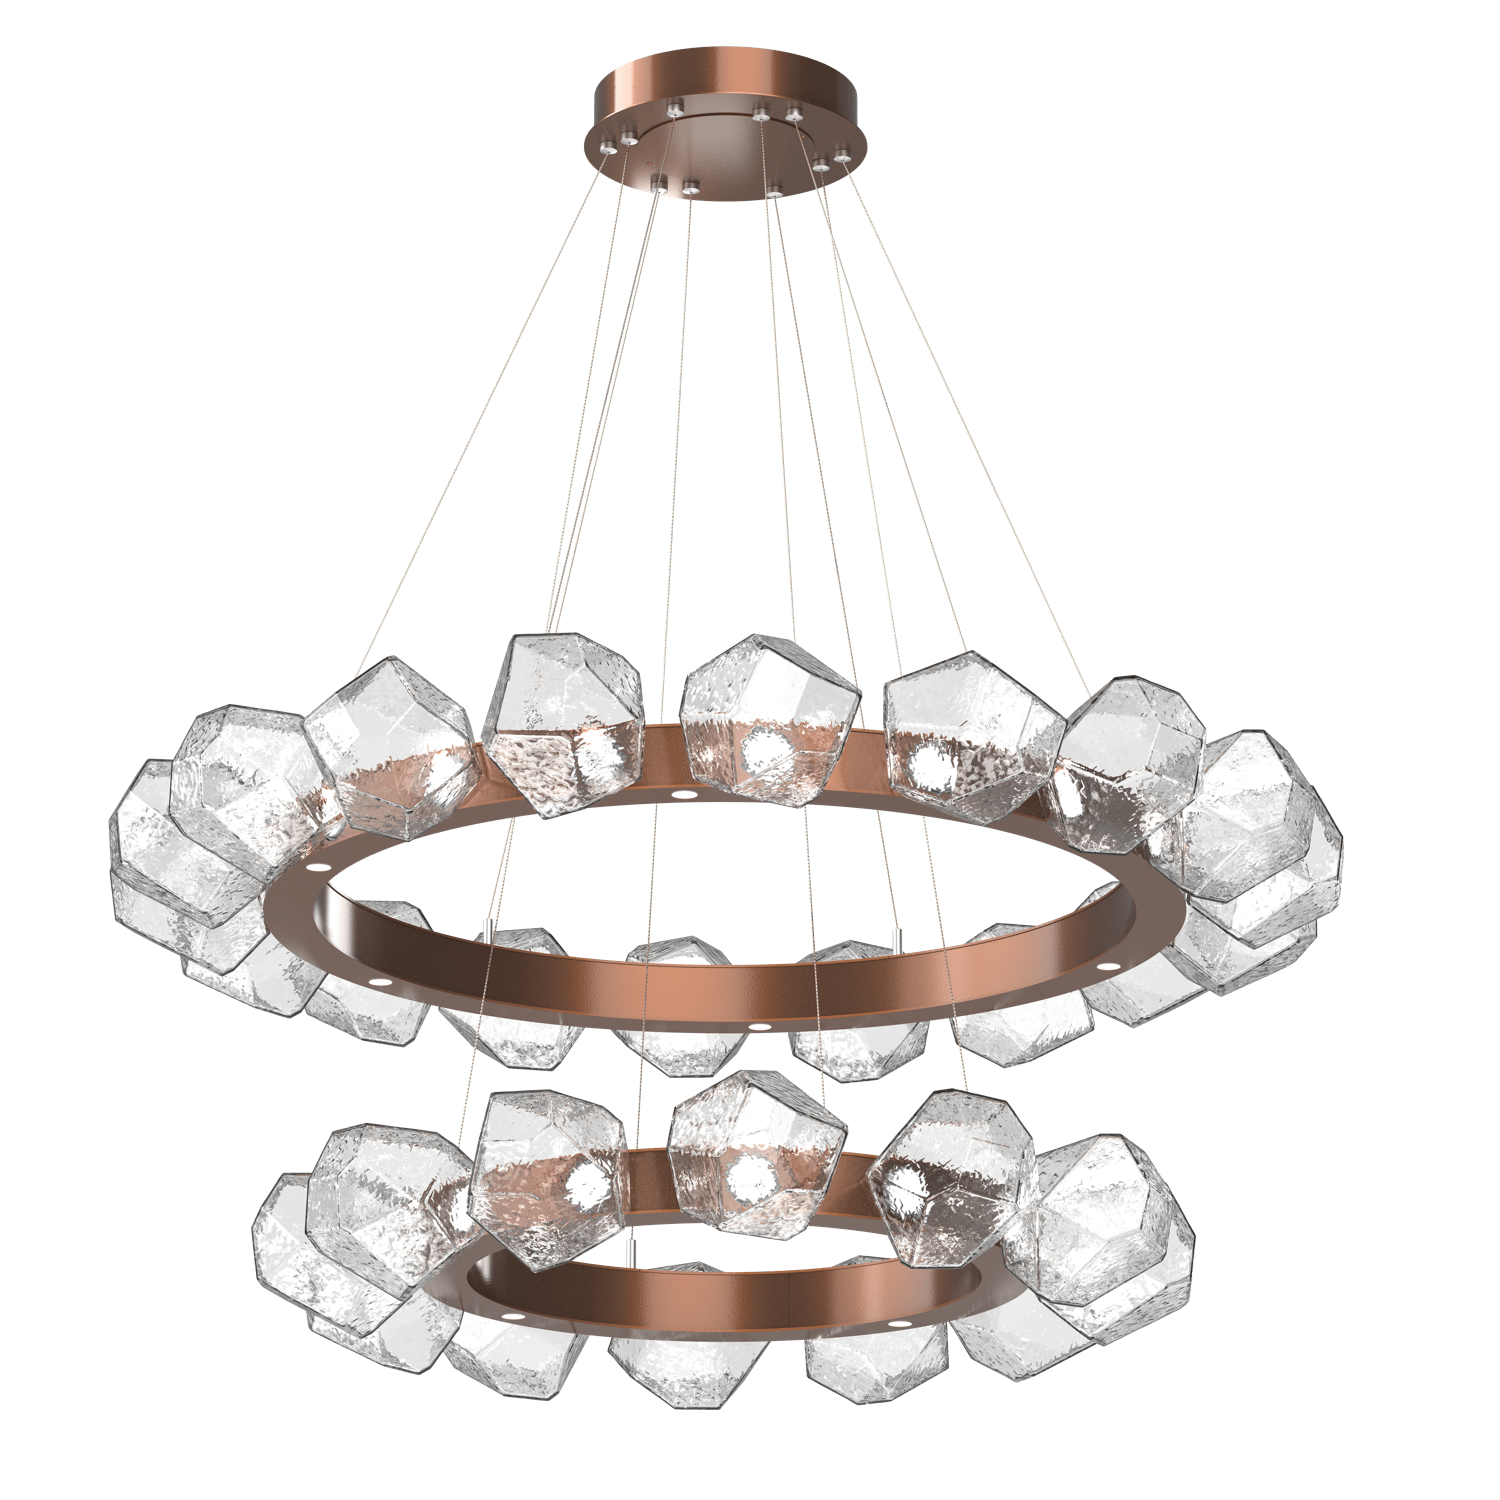 CHB0039-2T-BB-C-Hammerton-Studio-Gem-48-inch-two-tier-radial-ring-chandelier-with-burnished-bronze-finish-and-clear-blown-glass-shades-and-LED-lamping